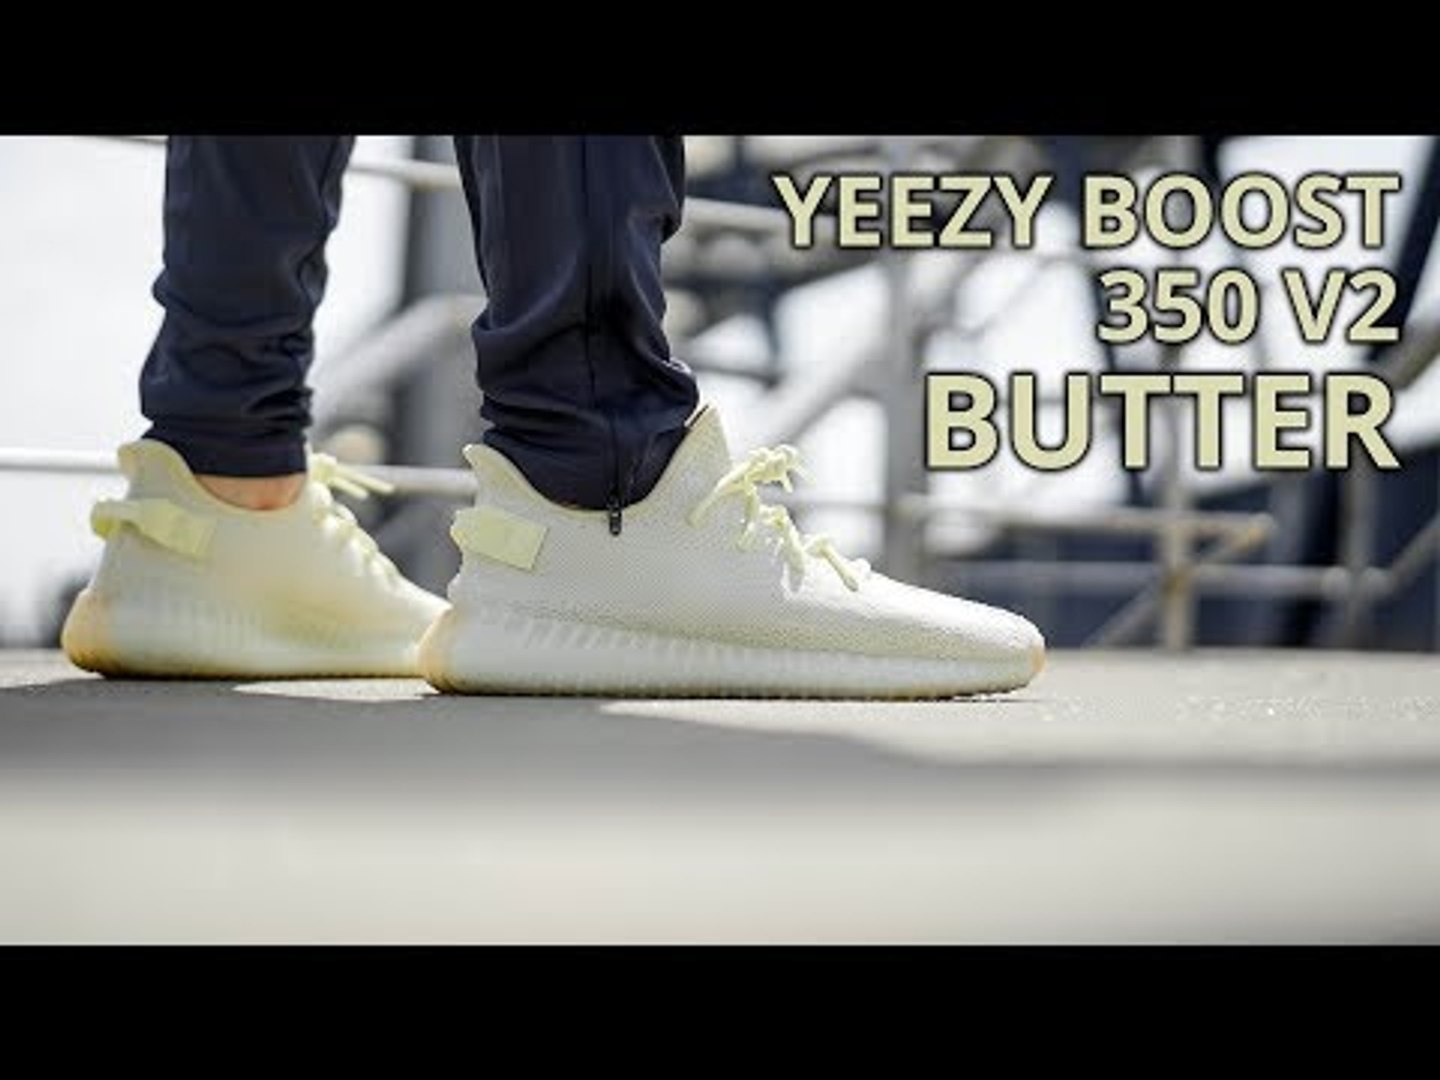 YEEZY BOOST 350 V2 BUTTER REVIEW UNBOXING & WHERE TO BUY - video Dailymotion